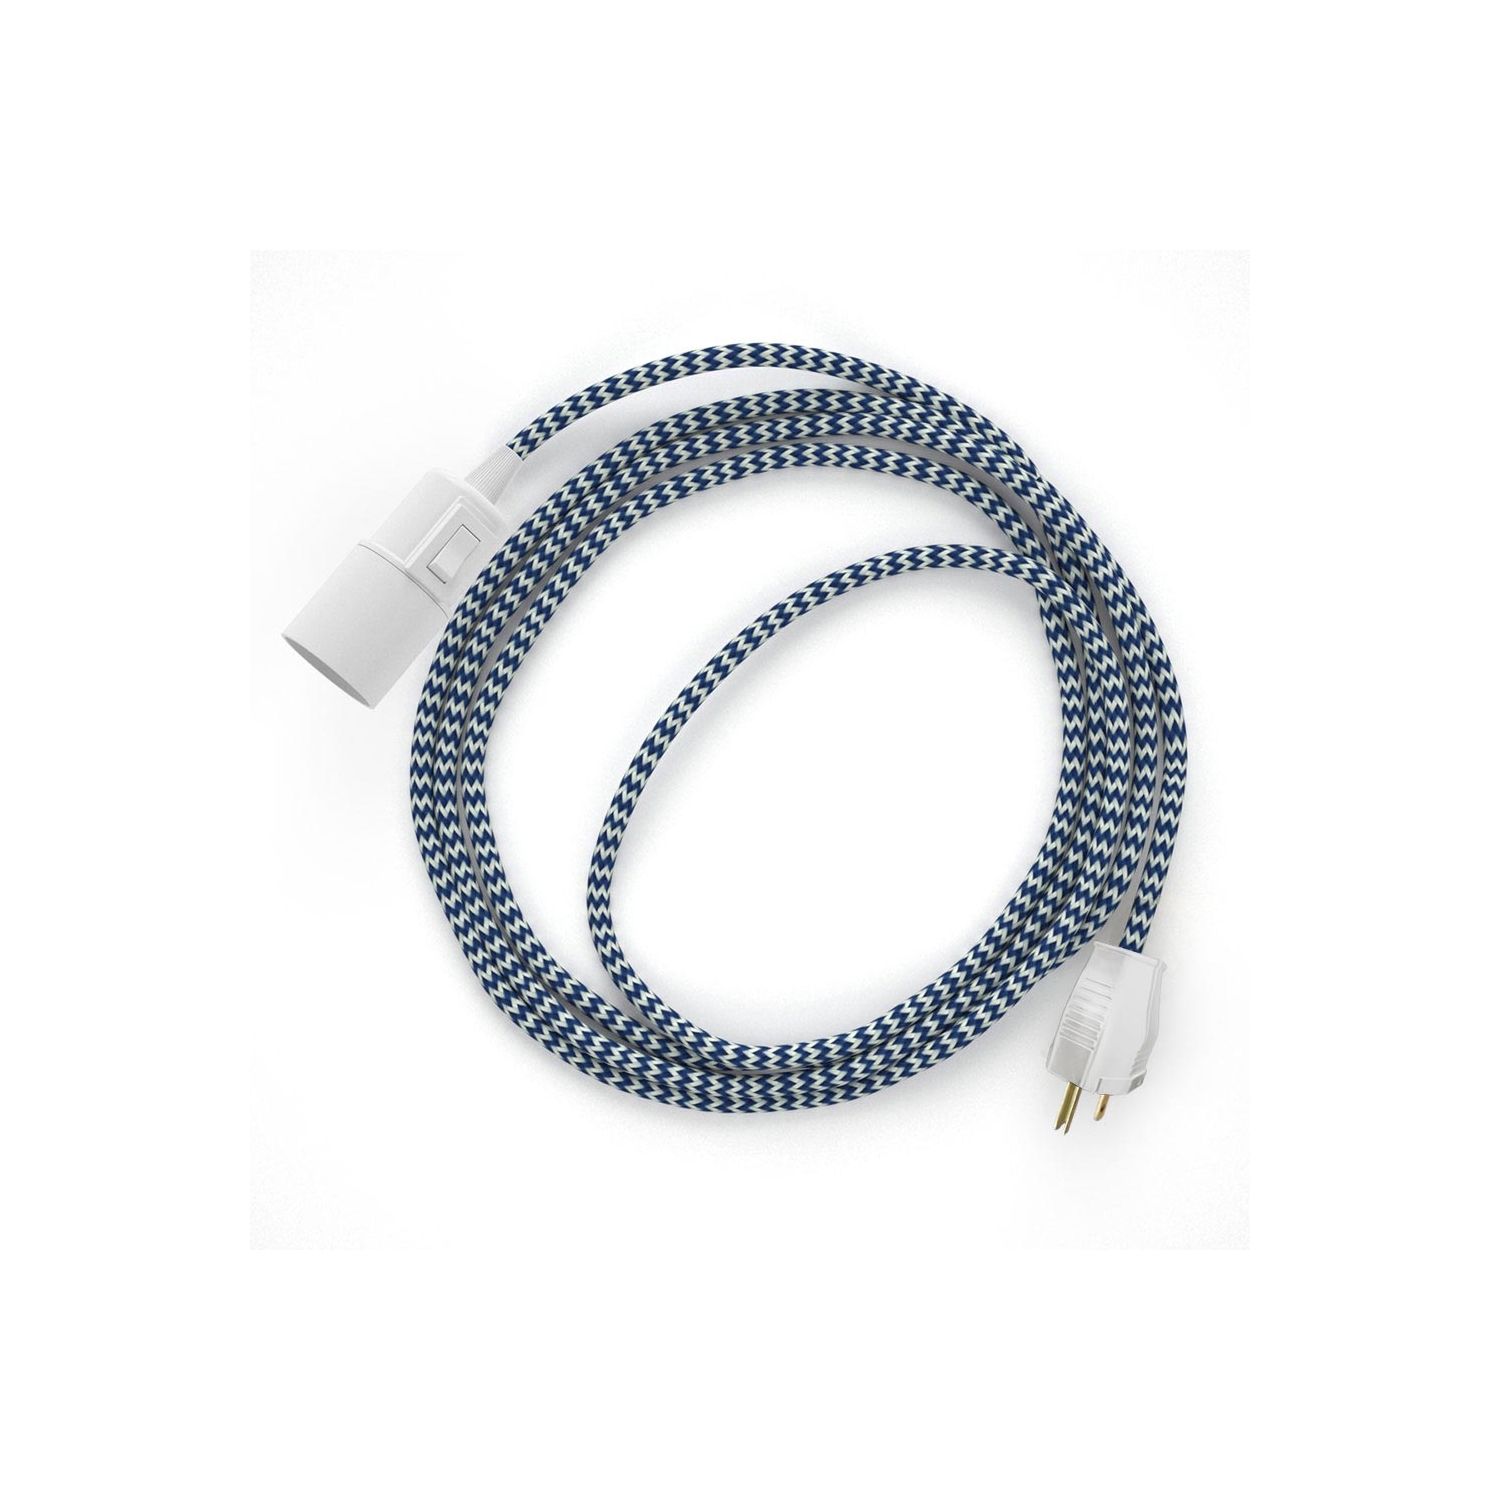 Plug-in Pendant with switch on socket | RZ12 Blue & White Chevron